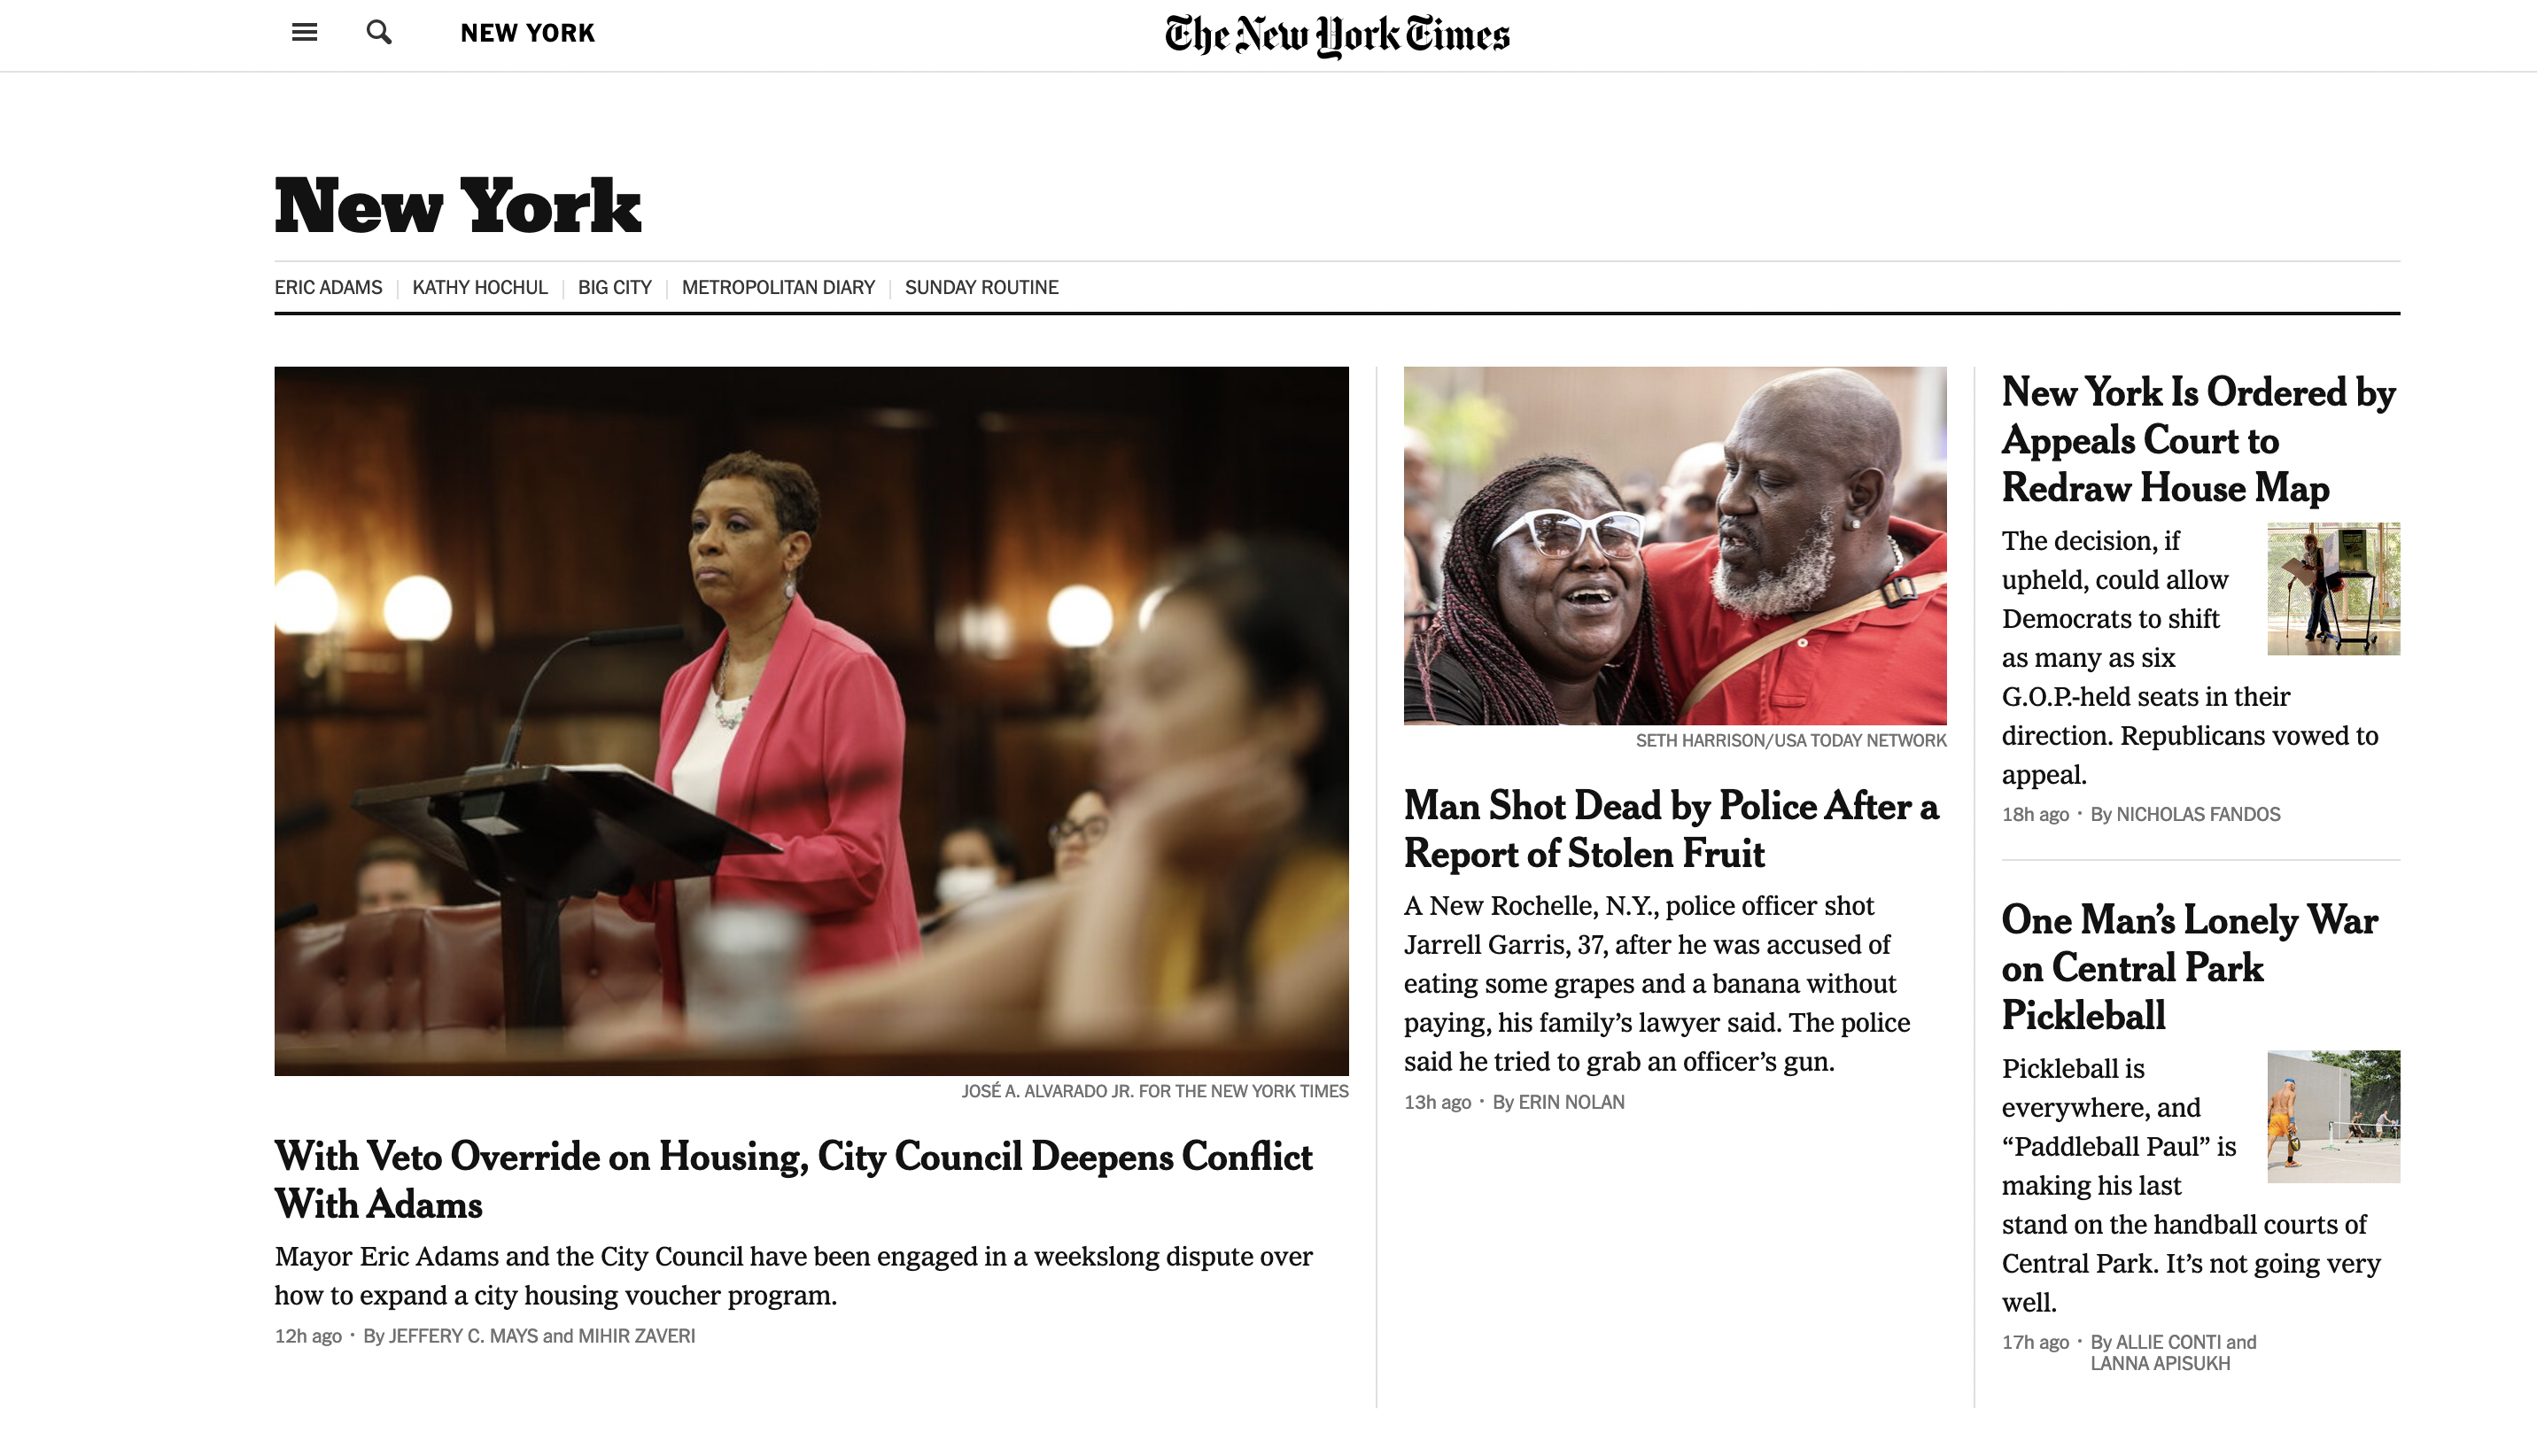 for The New York Times: With Veto Override on Housing, City Council Deepens Conflict With Adams